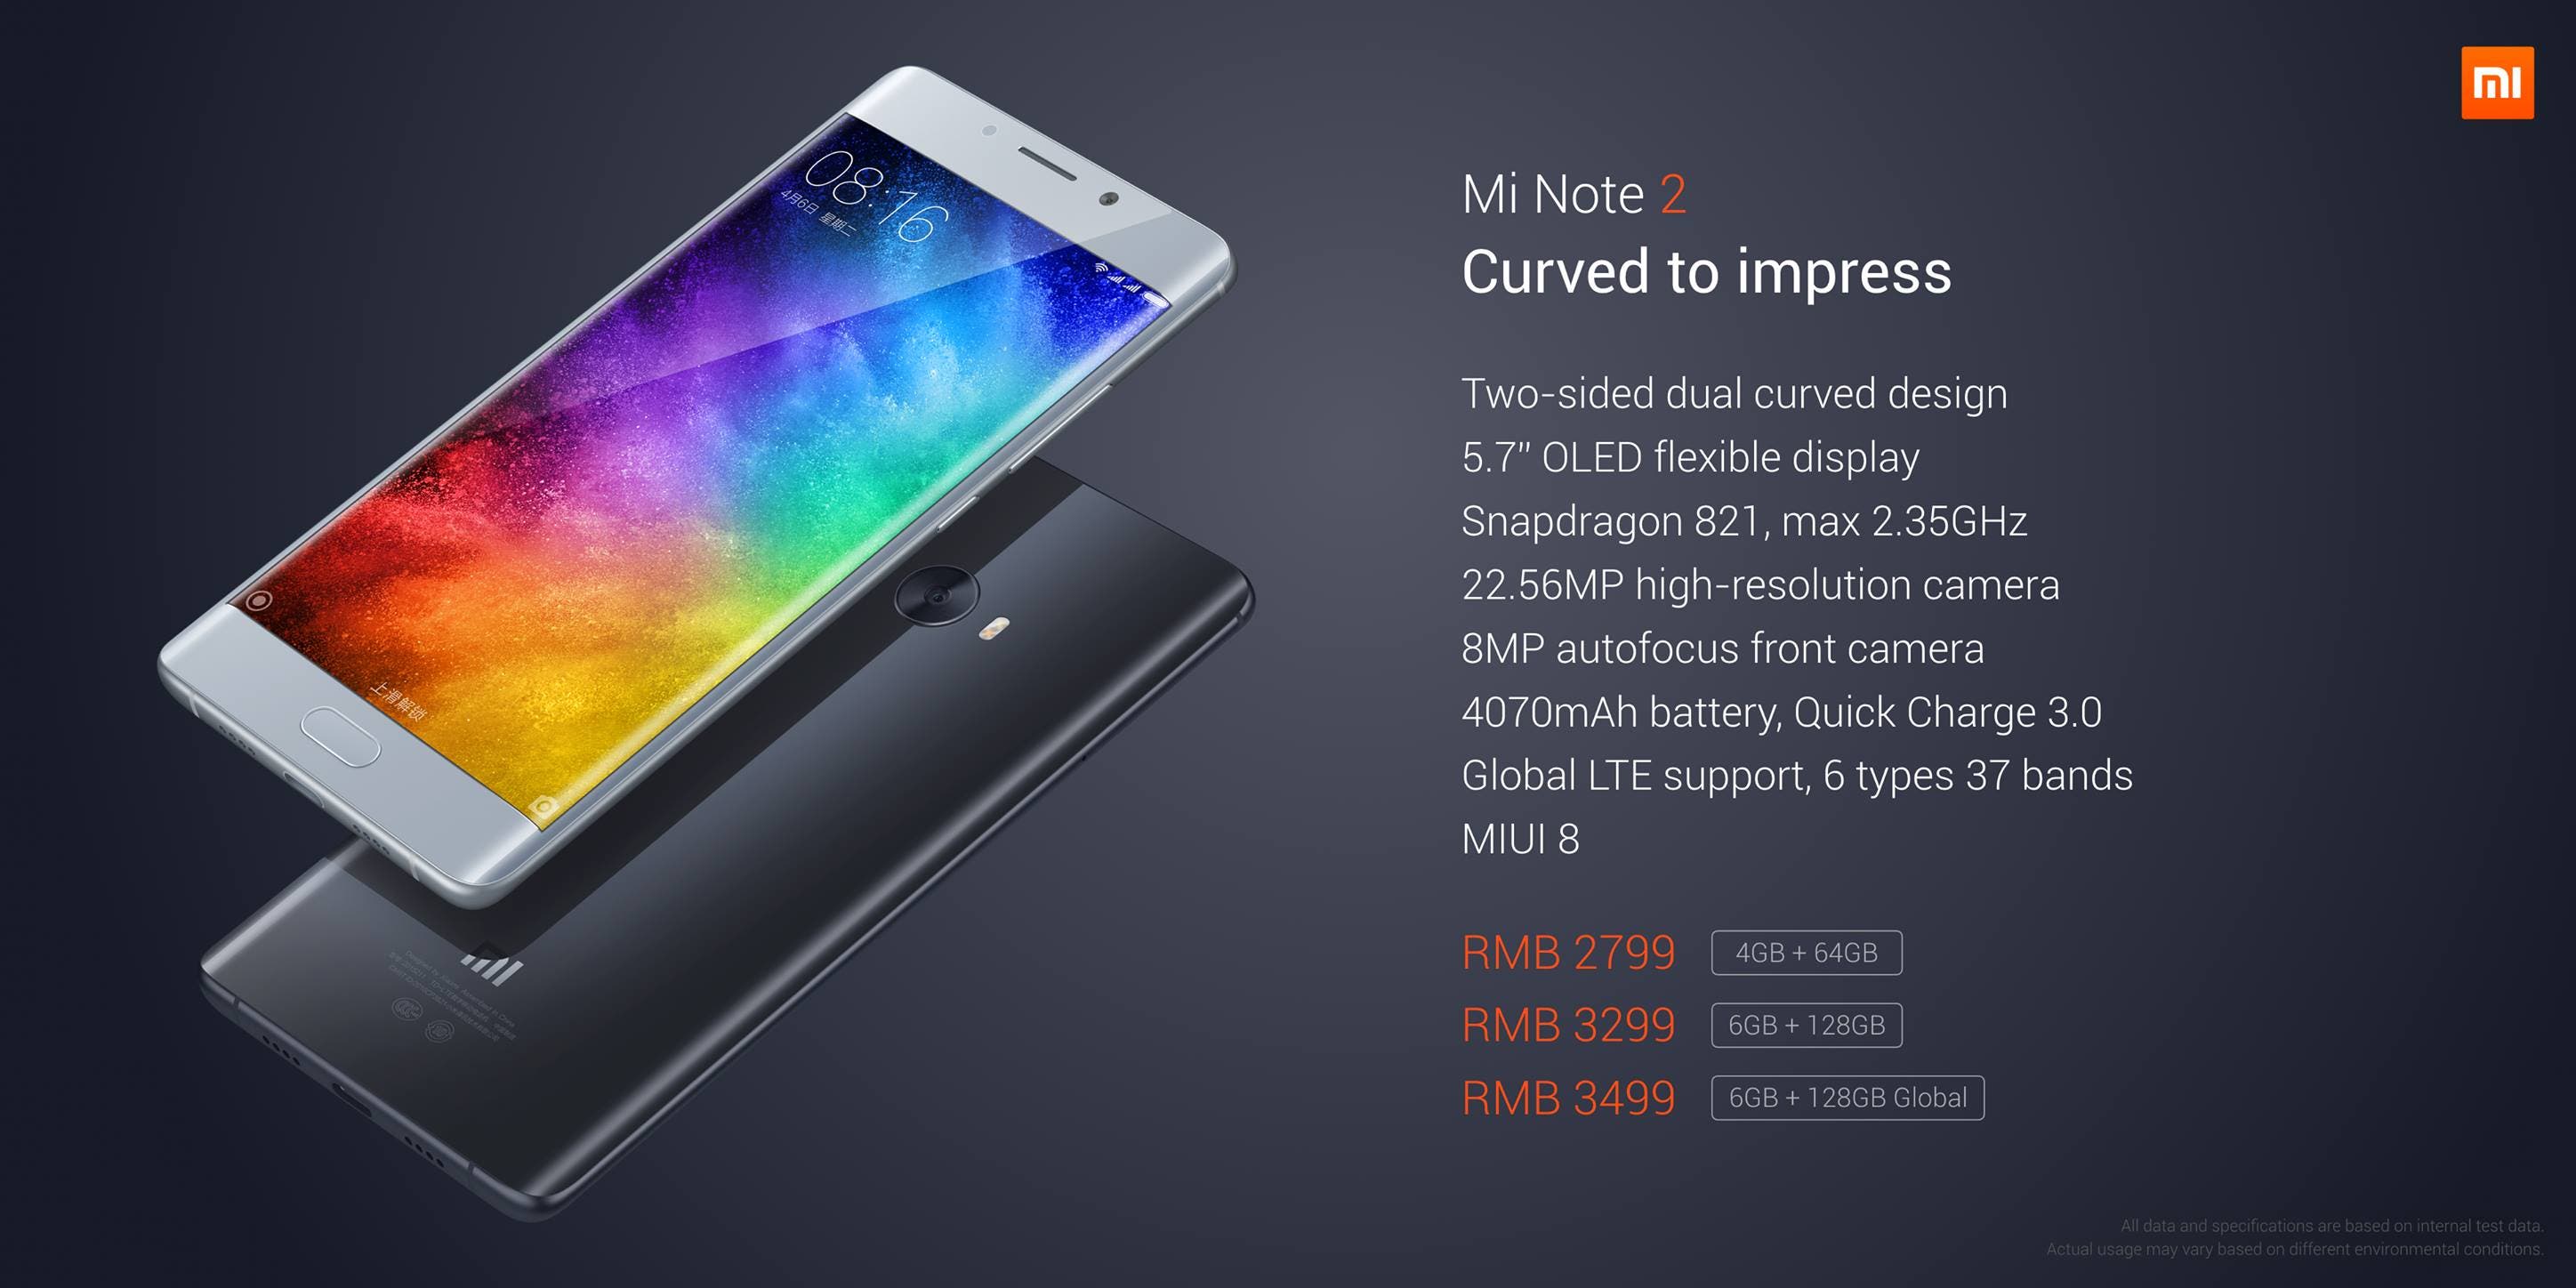 Xiaomi Mi Note 2 specifications: Curved Glass